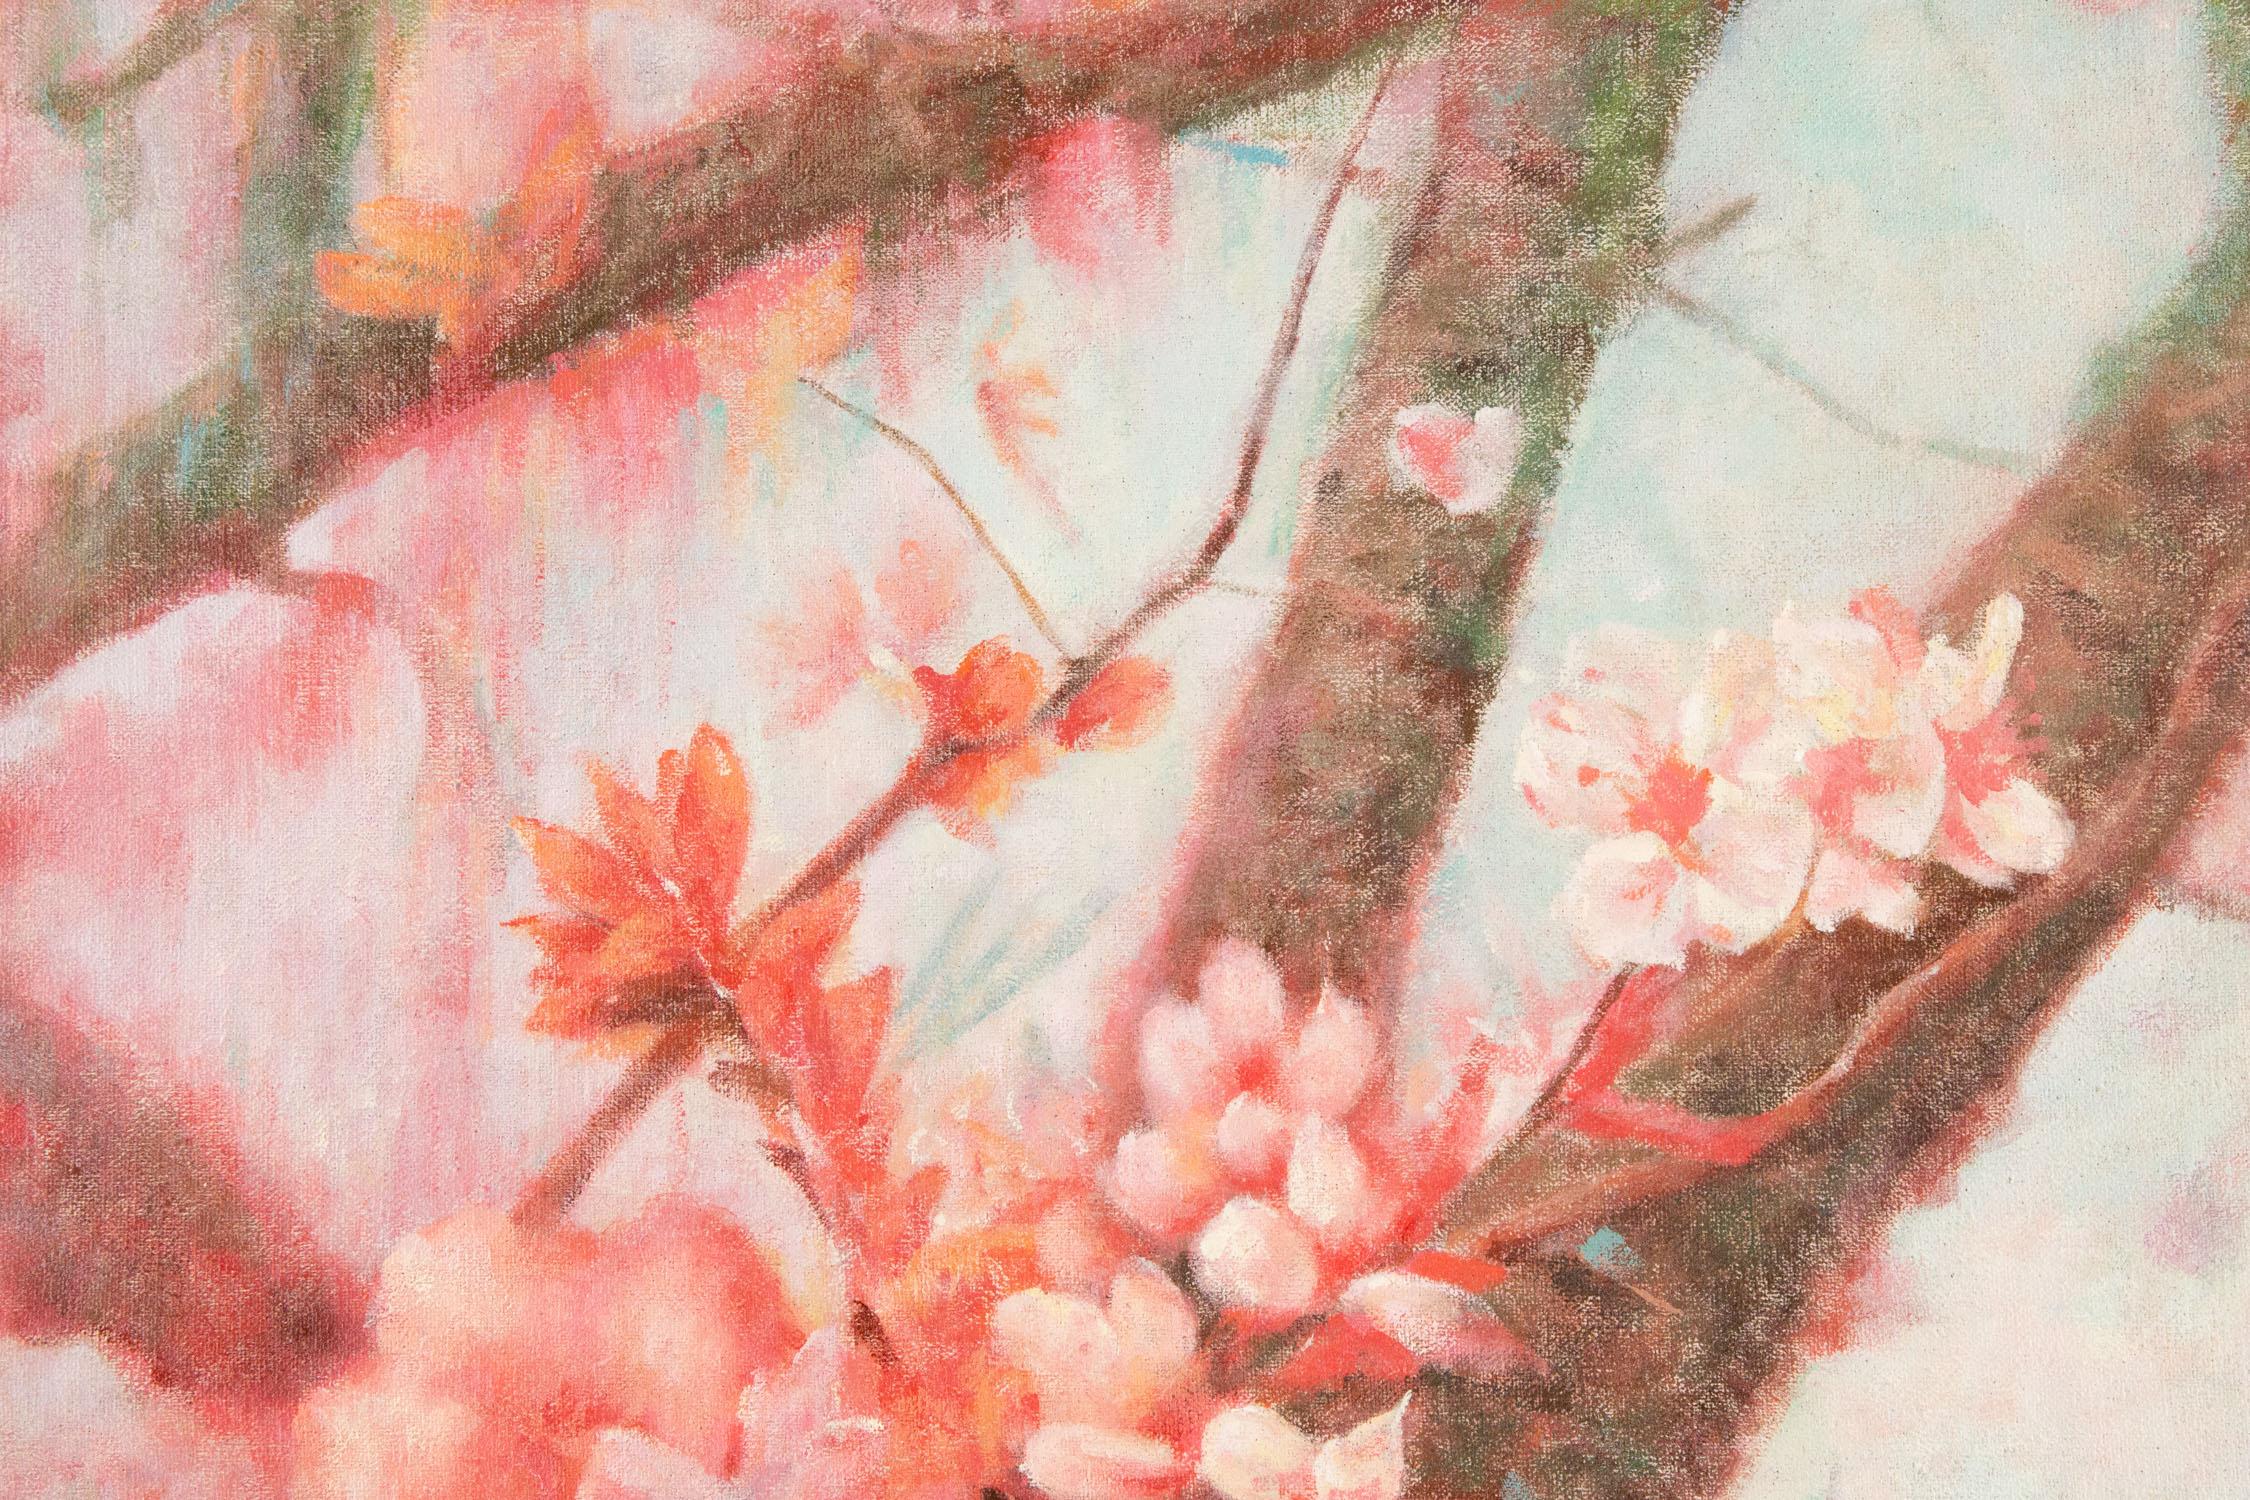 Title: Apricot Flower
Medium: Oil on canvas
Size: 23.5 x 23.75 inches
Frame: Framing options available!
Condition: The painting appears to be in excellent condition.
Note: This painting is unstretched
Year: 2000 Circa
Artist: ShouZhang